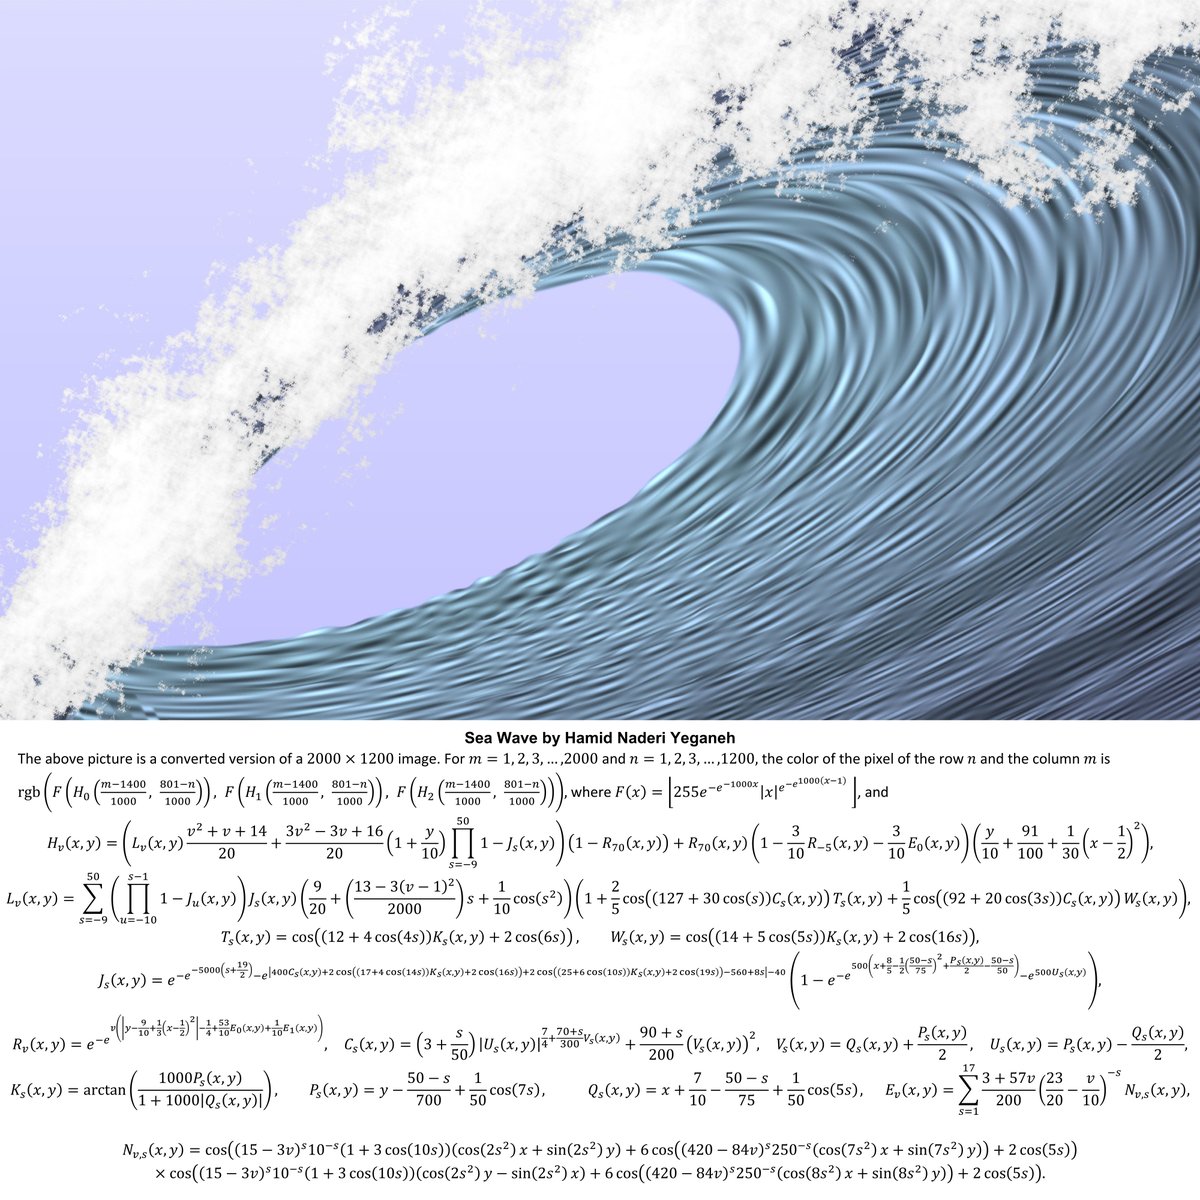 I drew this sea wave with mathematical equations.